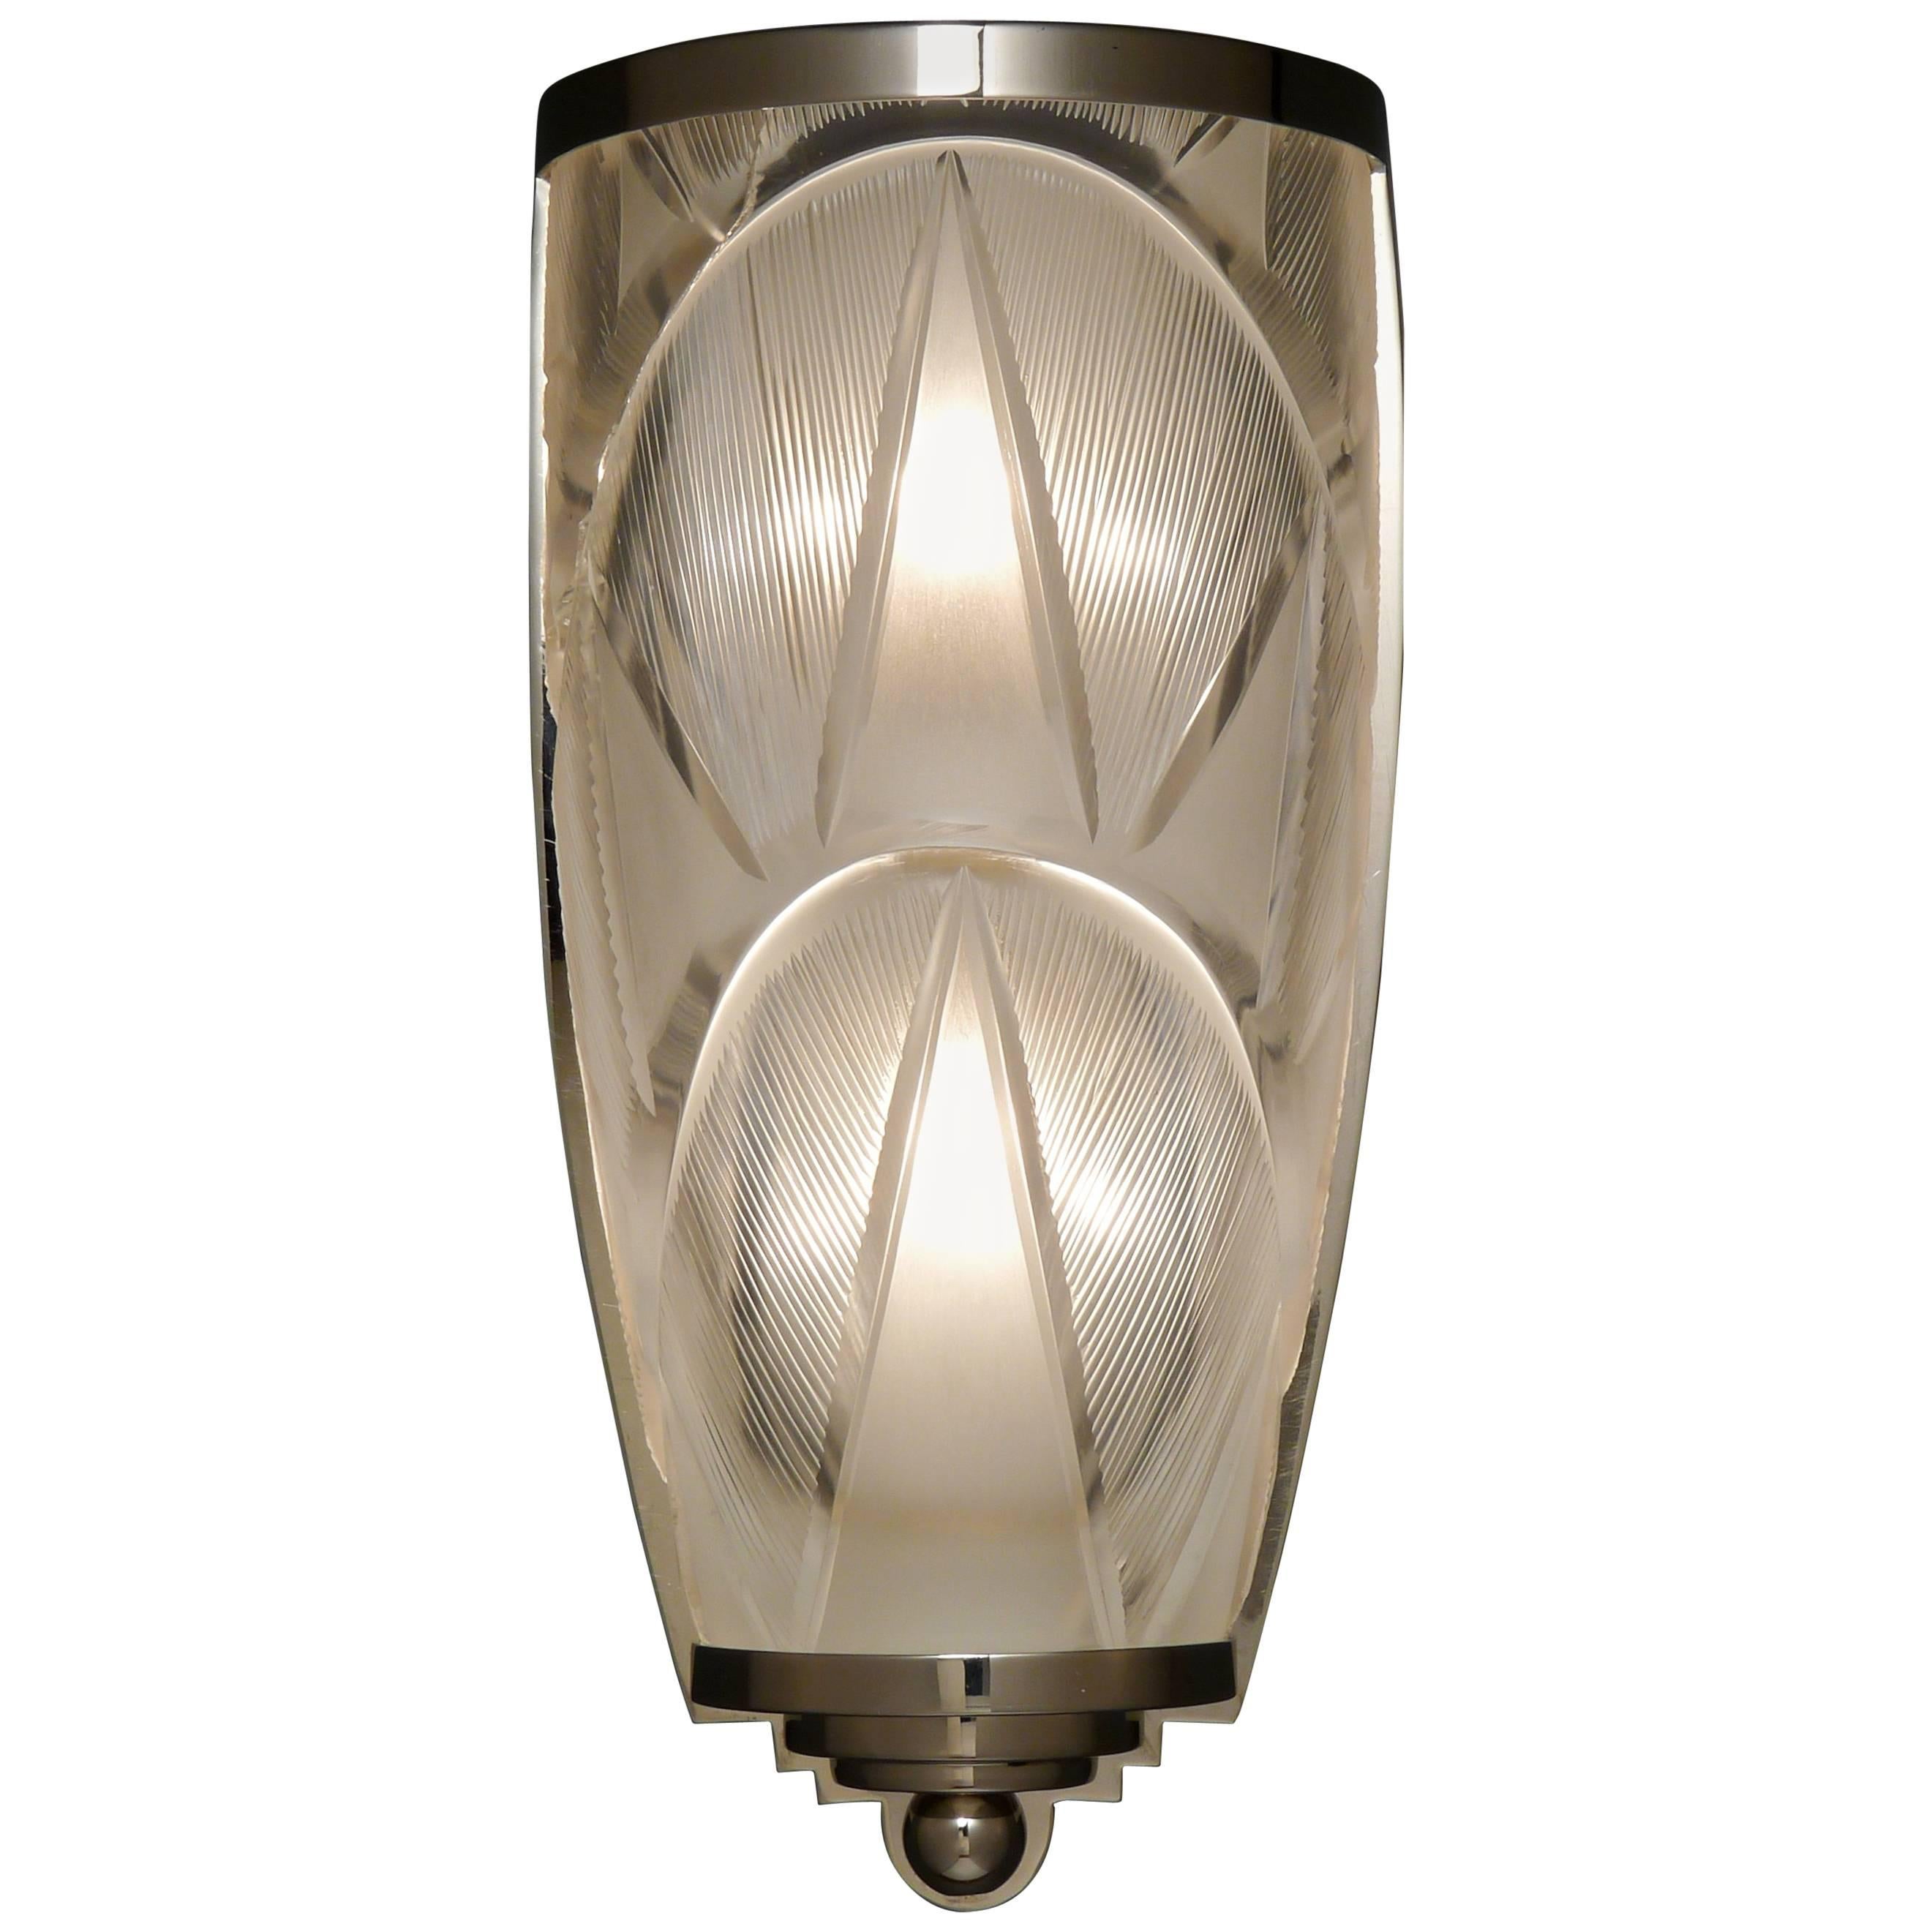 Art Deco Style Hand-Cut Crystal Wall Sconce by Cristal Benito "Manhattan" For Sale